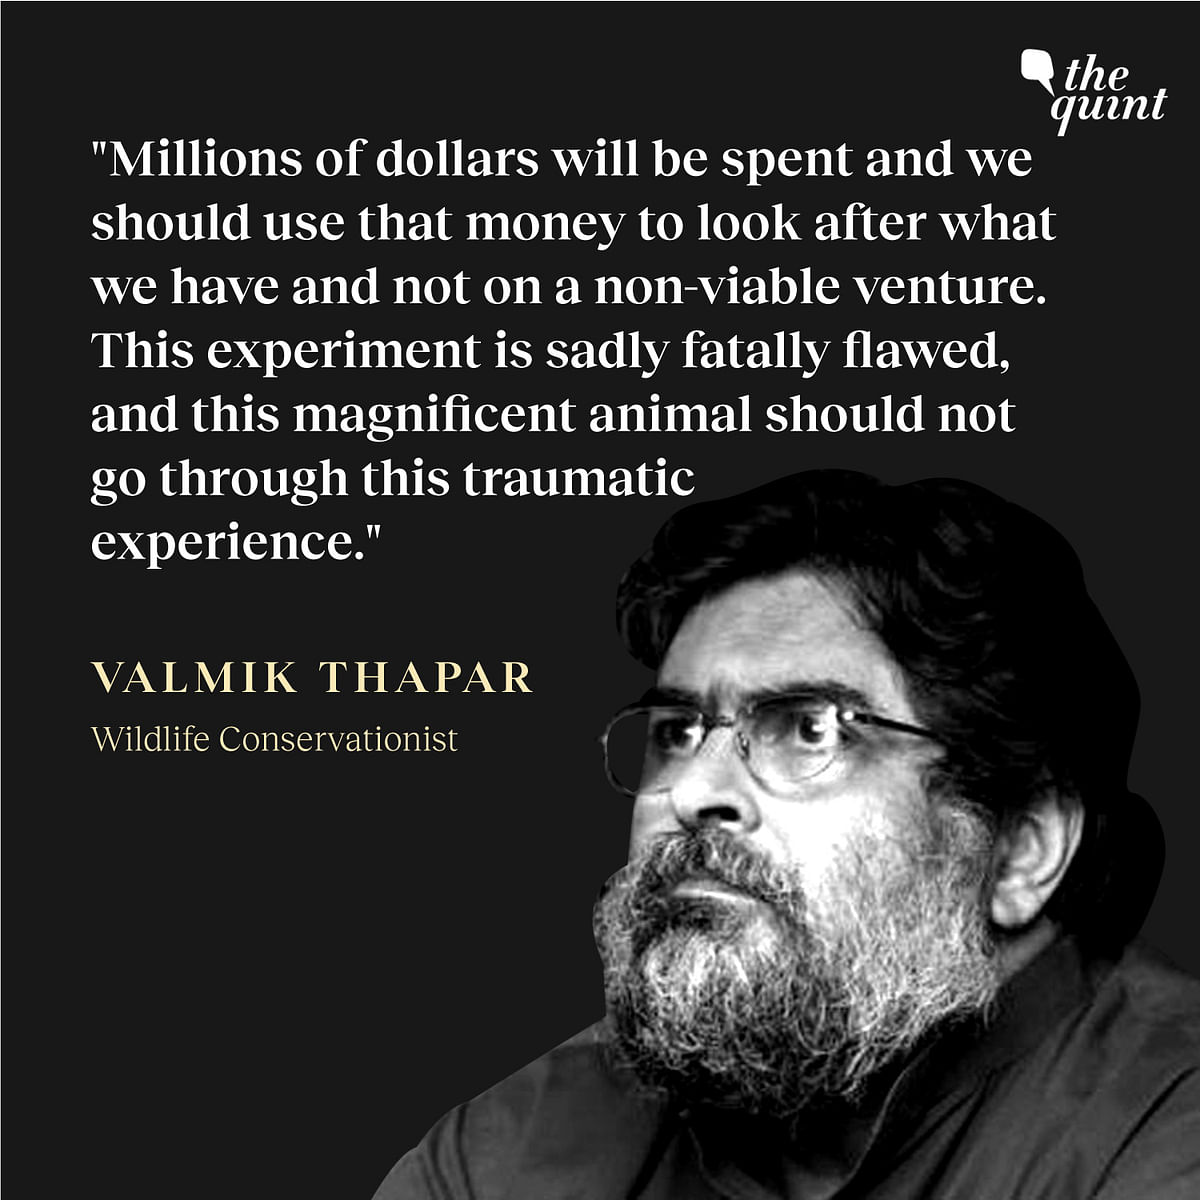 "The effort to introduce African Cheetahs is a high-risk venture which India does not need," Valmik Thapar 